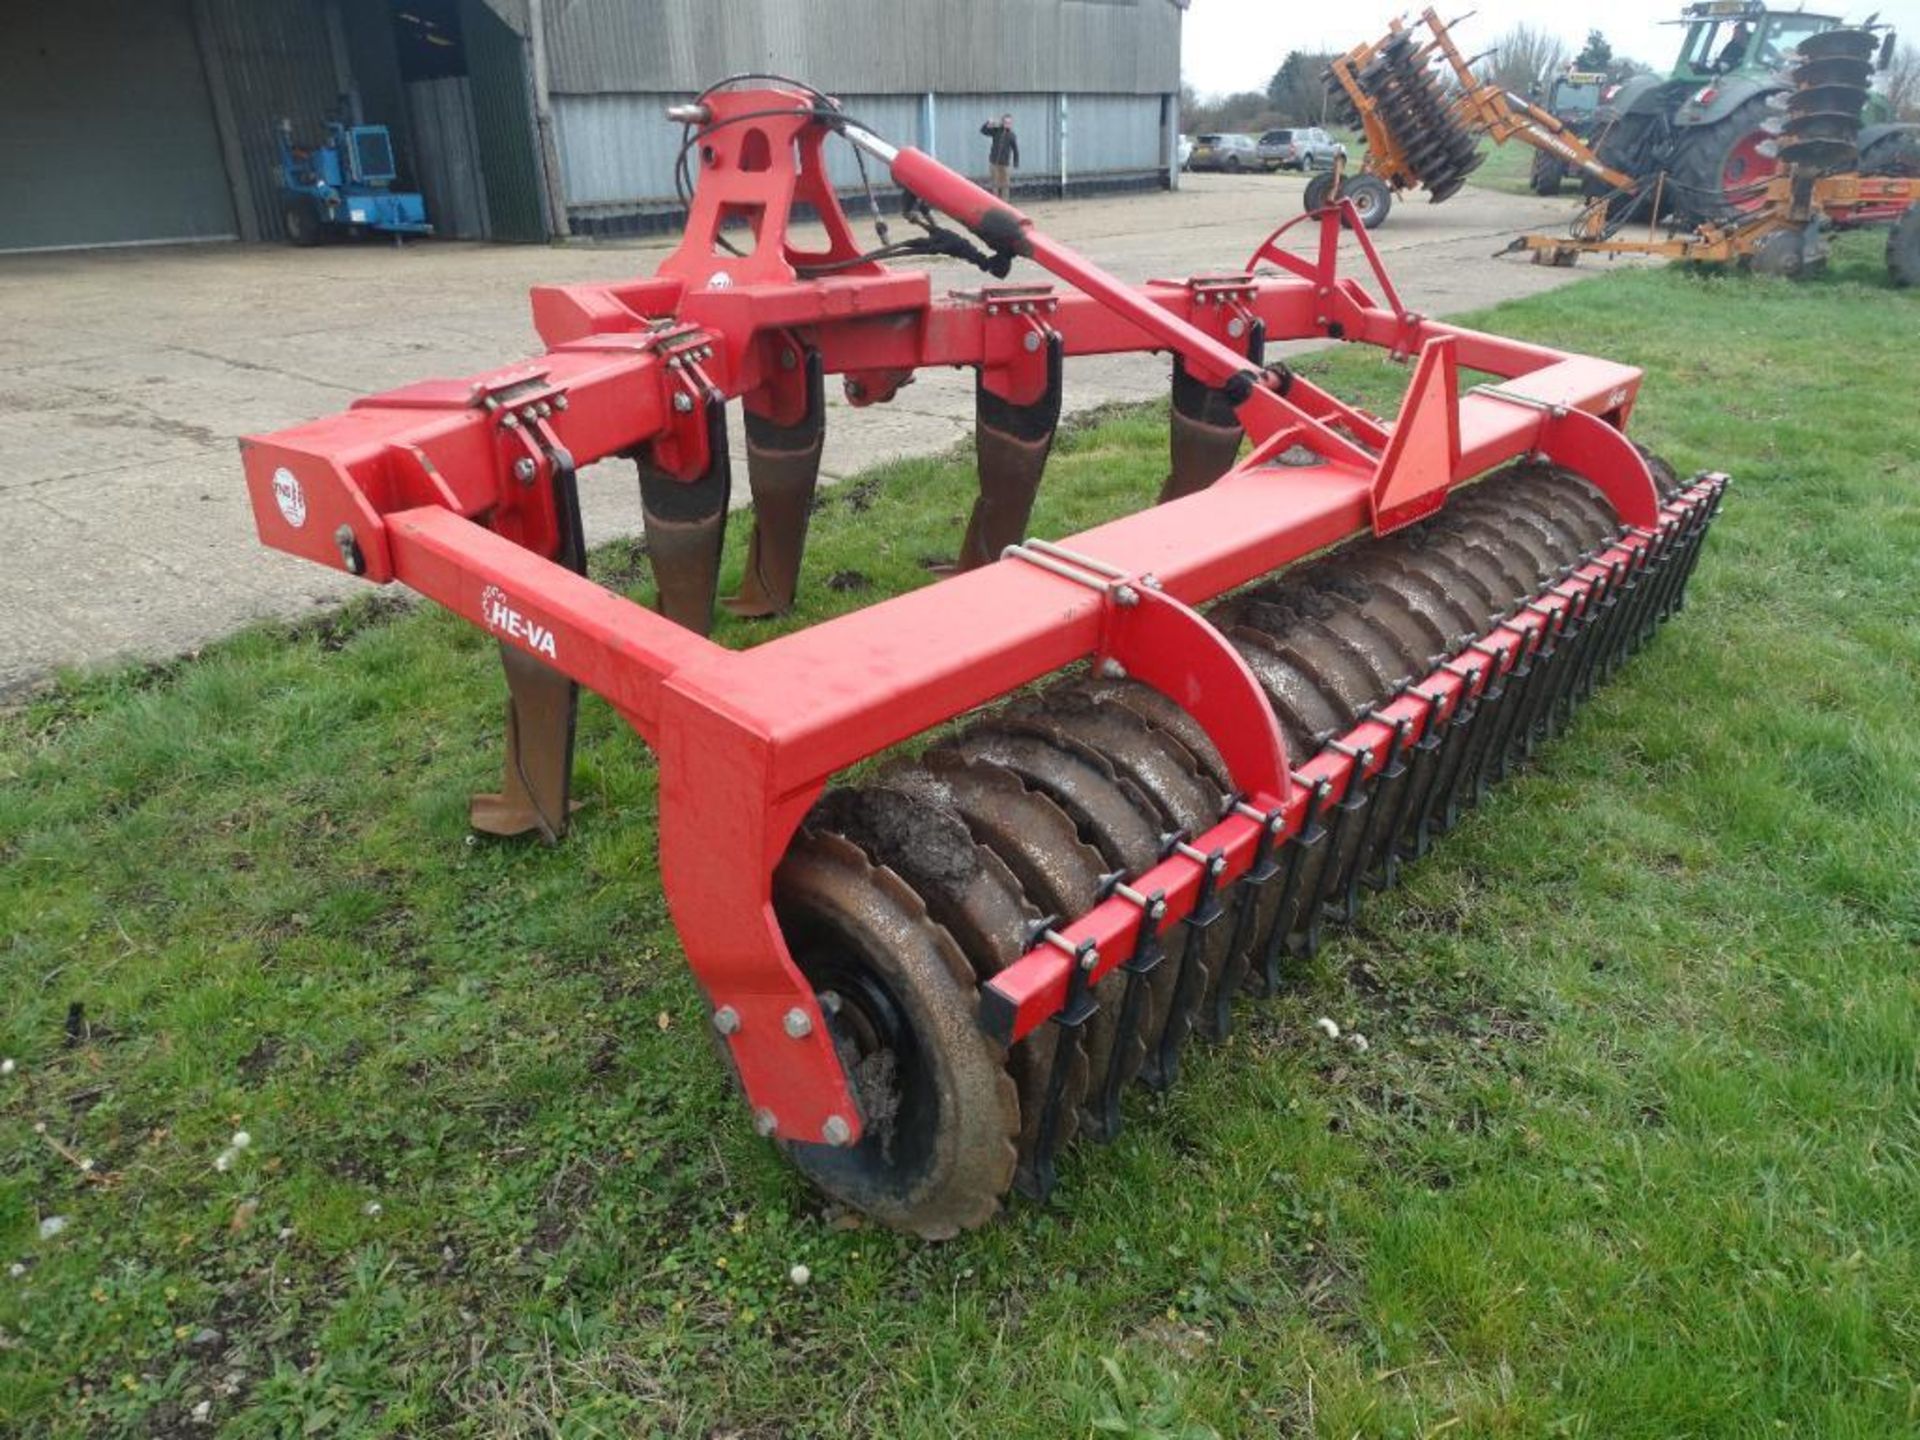 2014 HE-VA 5 leg subsoiler with hydraulic adjustable rear packer. Serial No: 30527 ​​​​​​​Manual in - Image 8 of 14